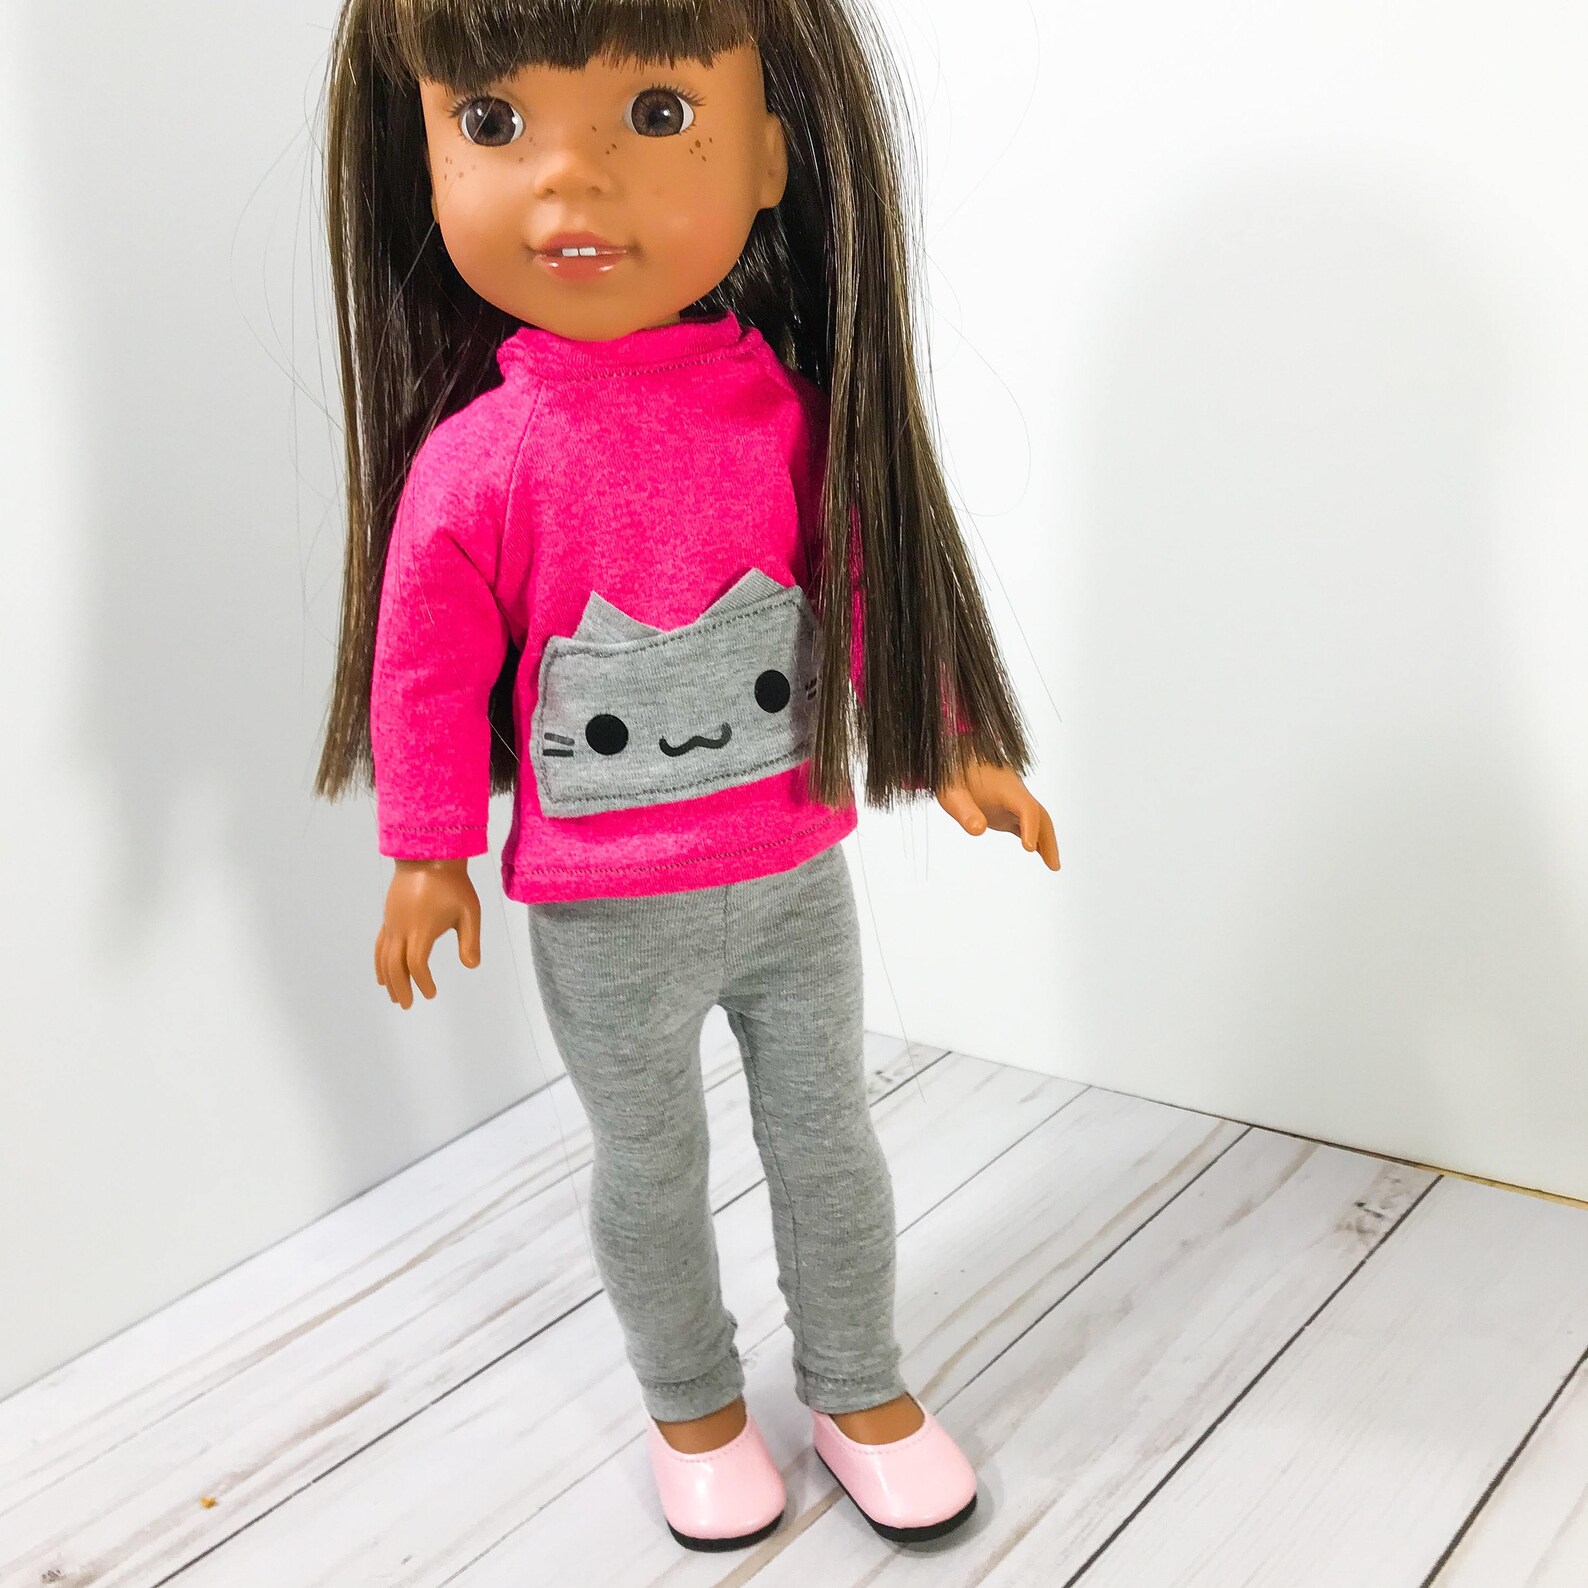 14 5 Inch Doll Clothes Cat Sweater Leggings Fits Dolls Like Etsy